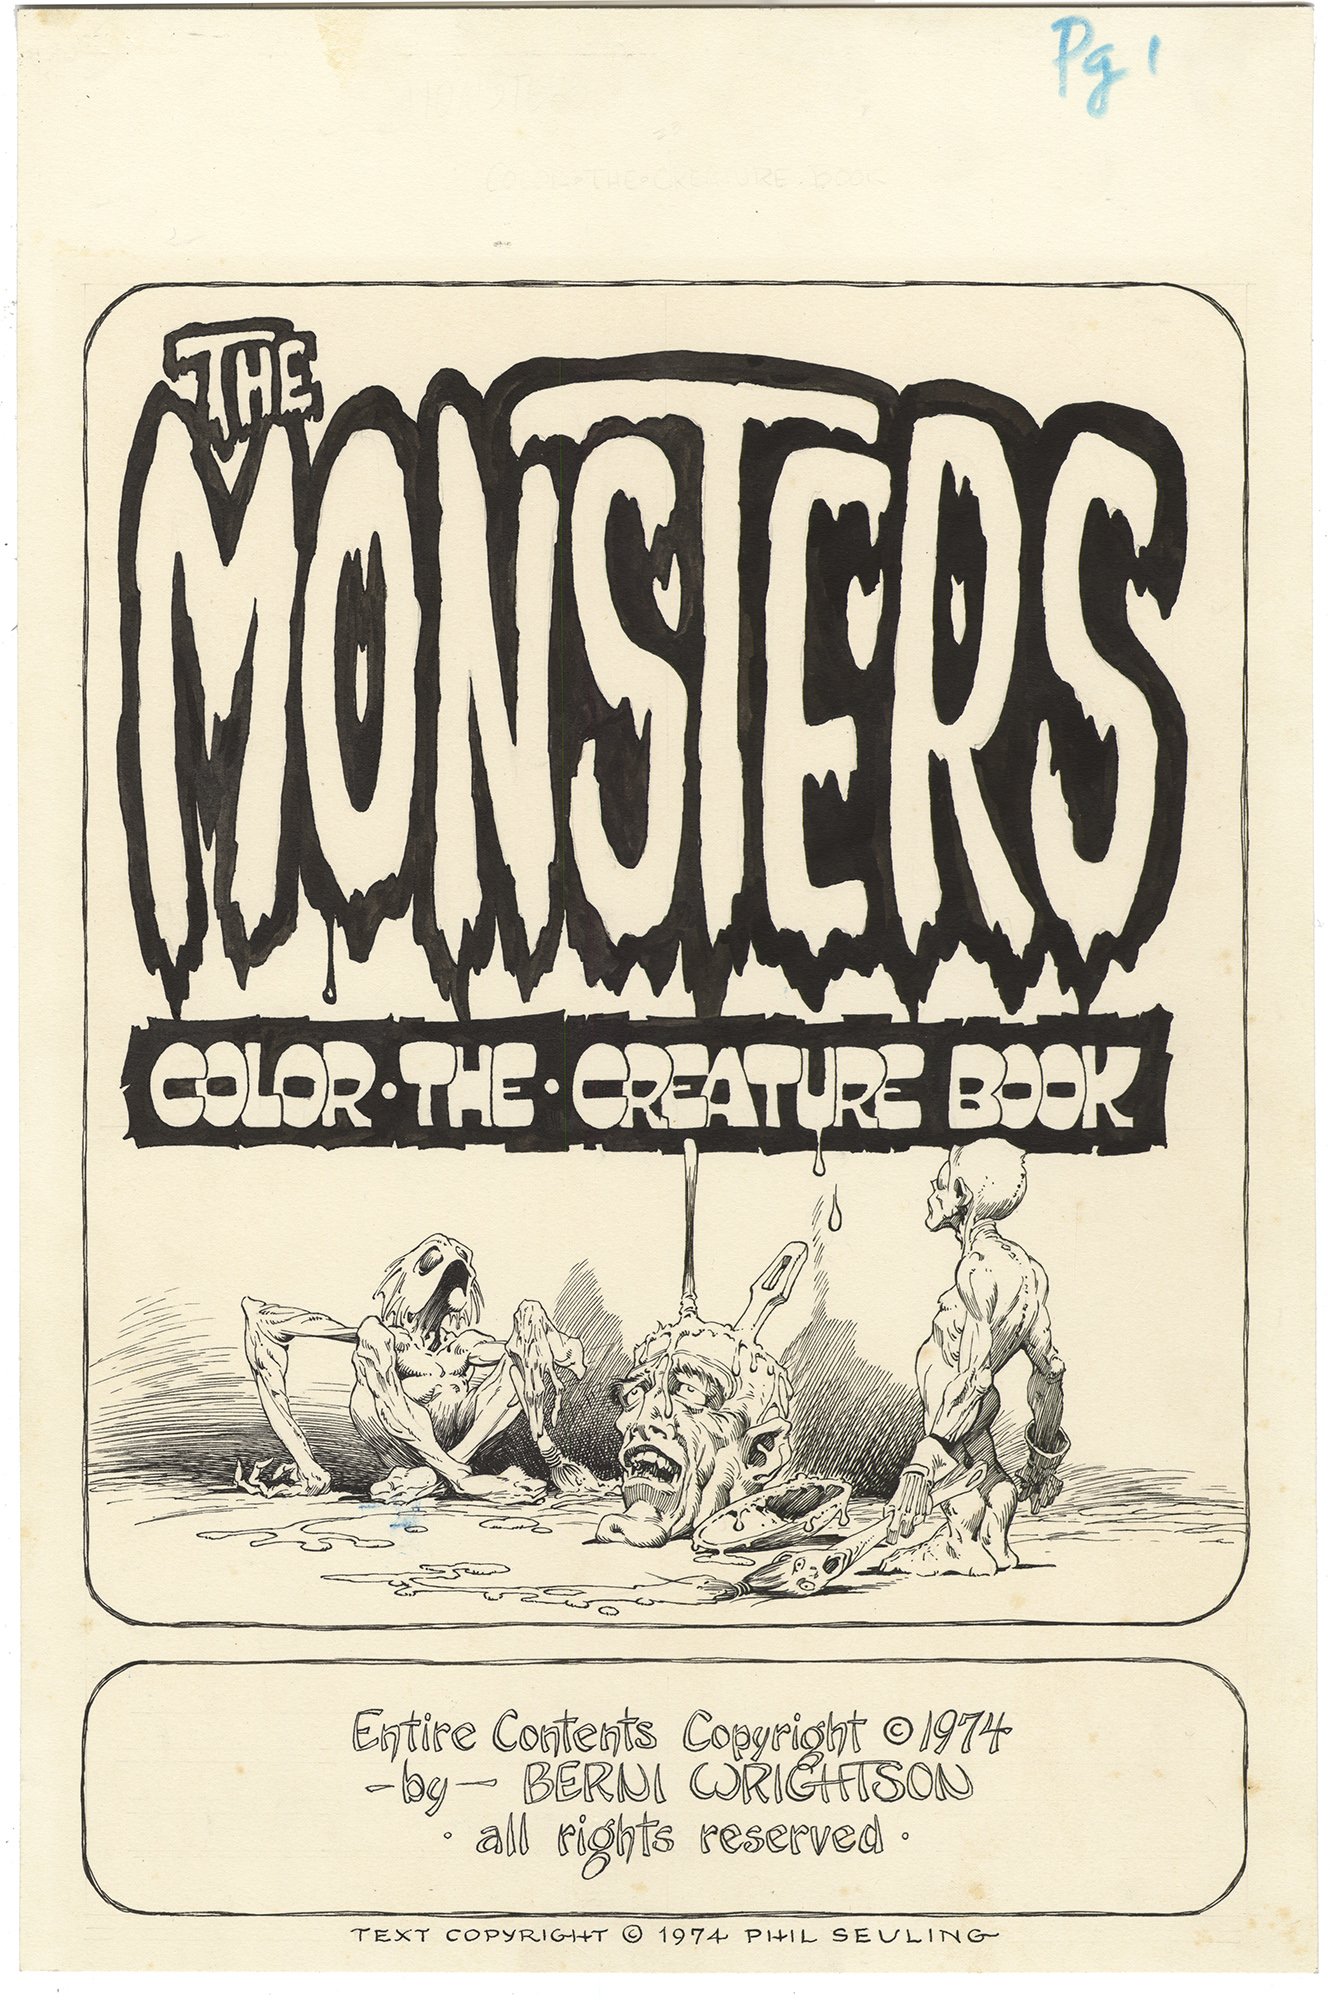 Monsters Color-the-Creature Book #1 p1